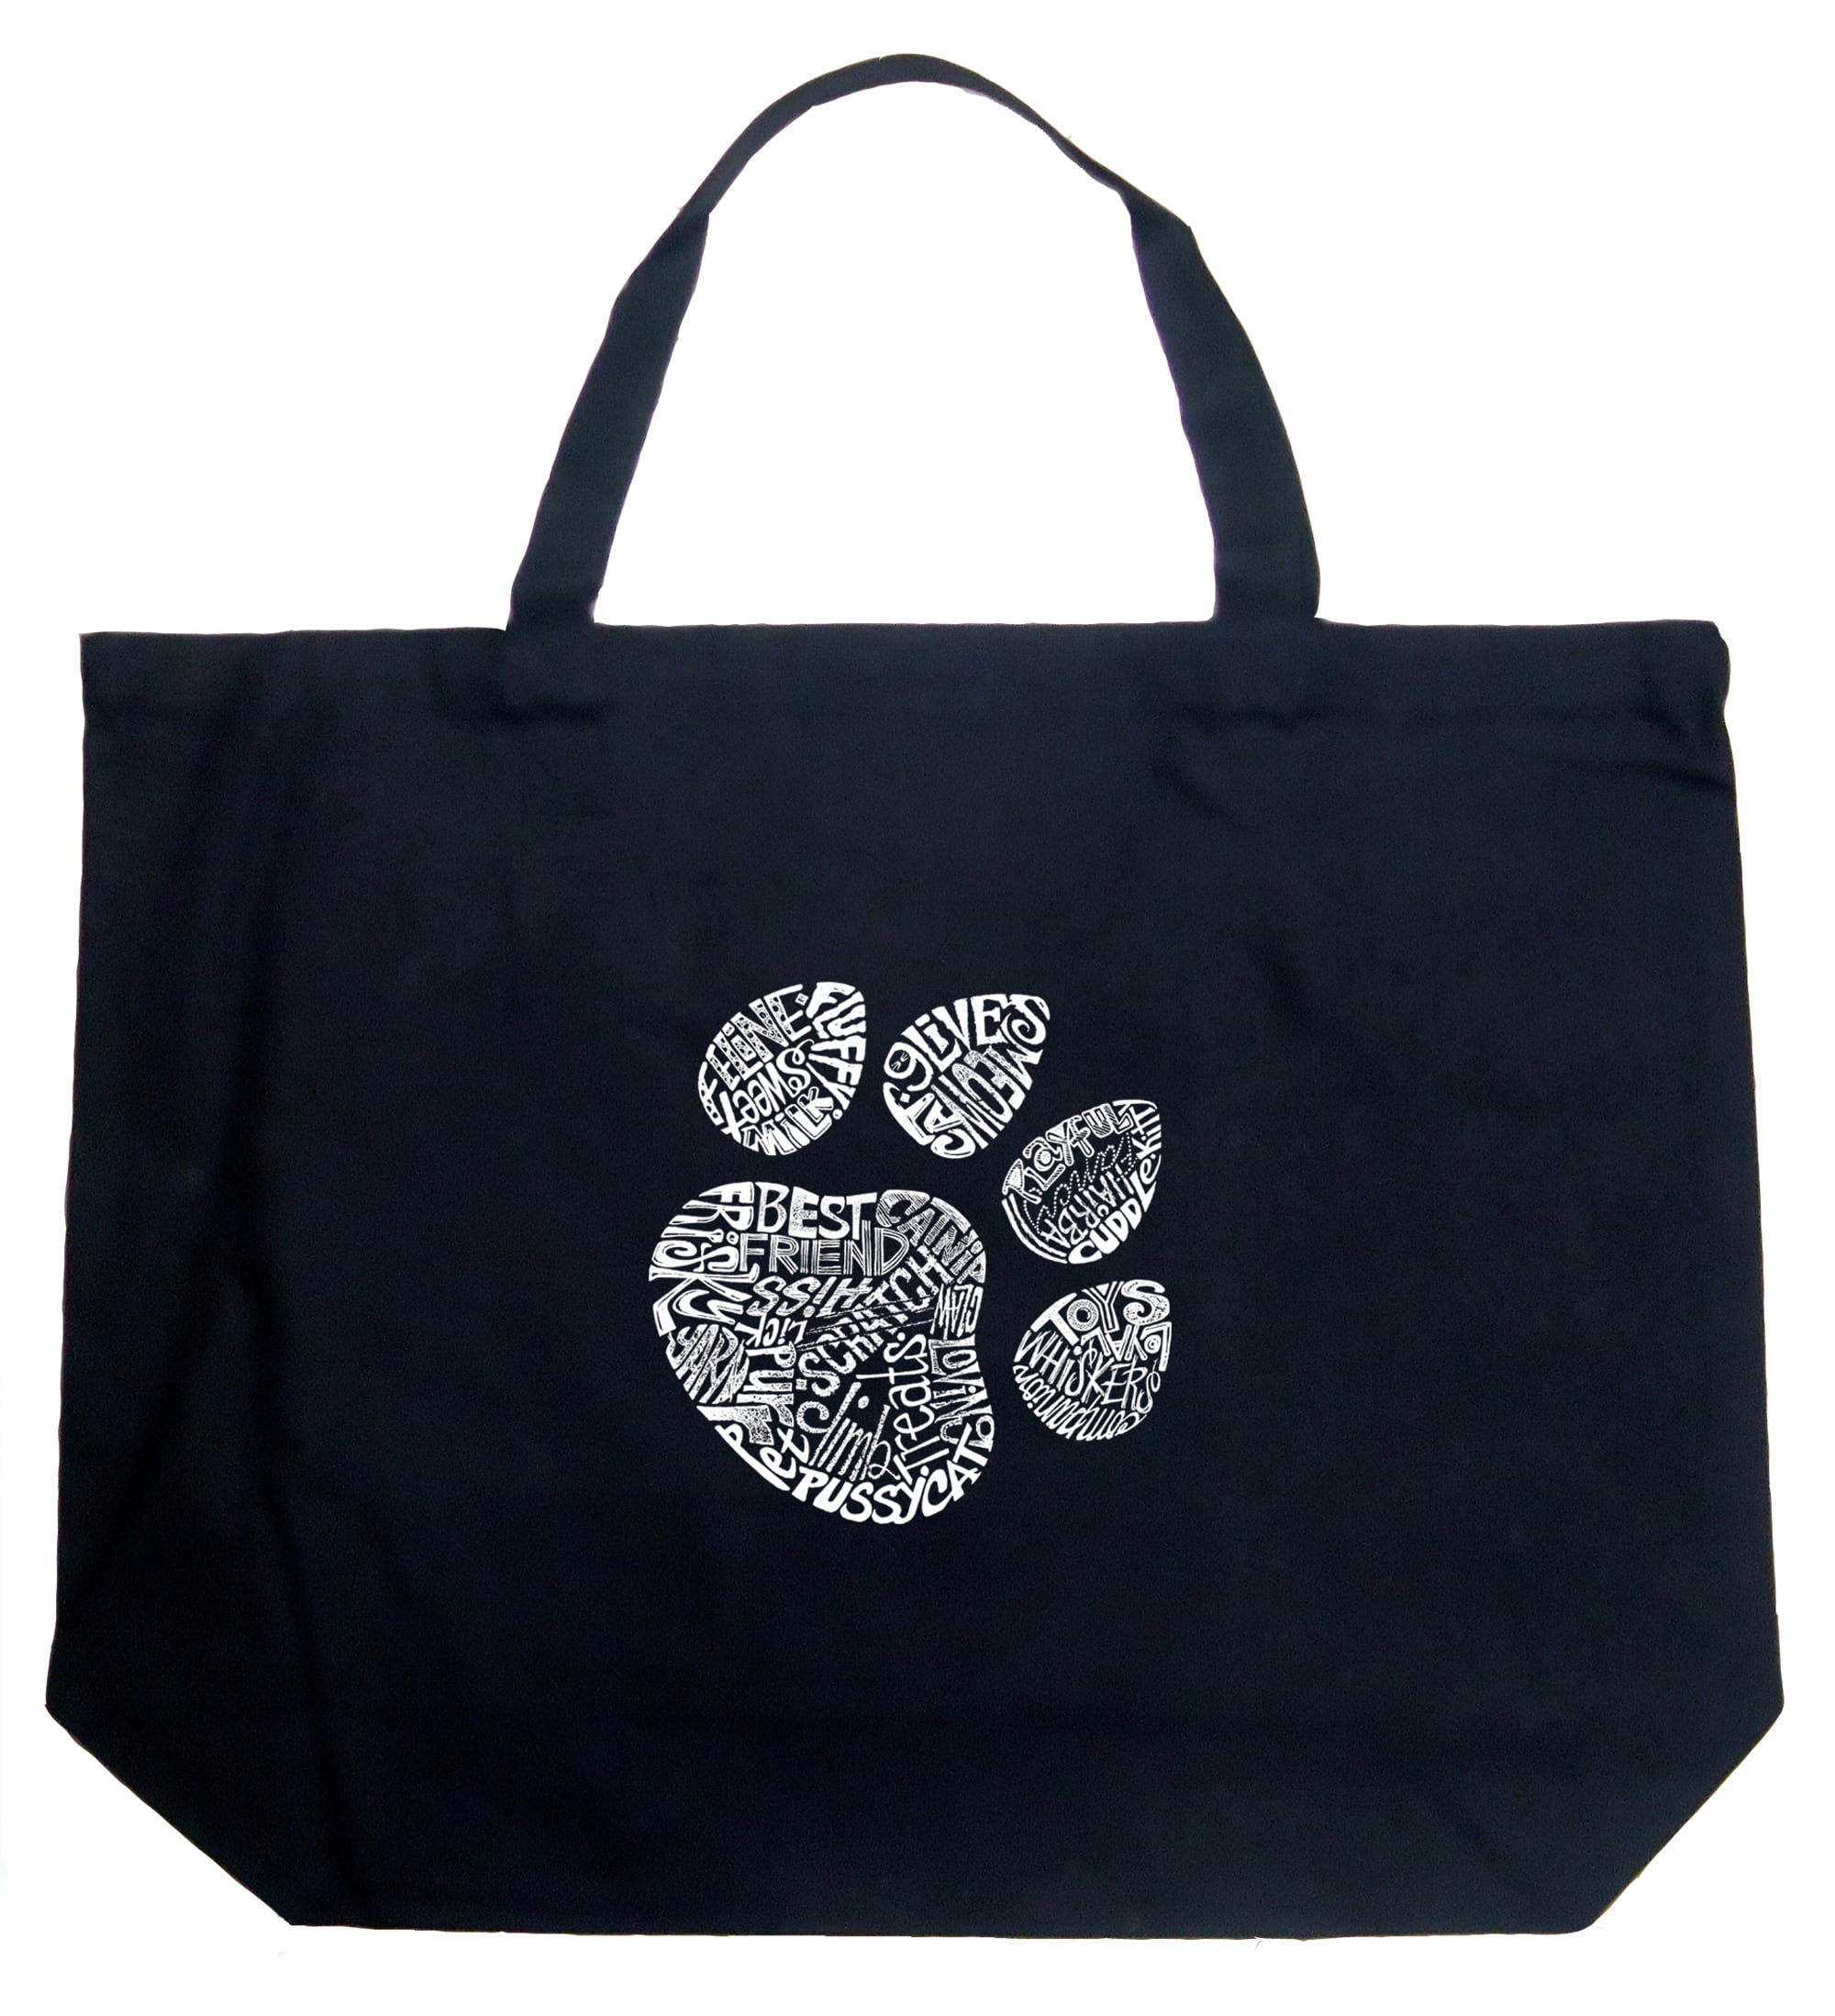 Front & Back Personalized Pawprints & Bones Hobo Purse w/Genuine Leather Trim